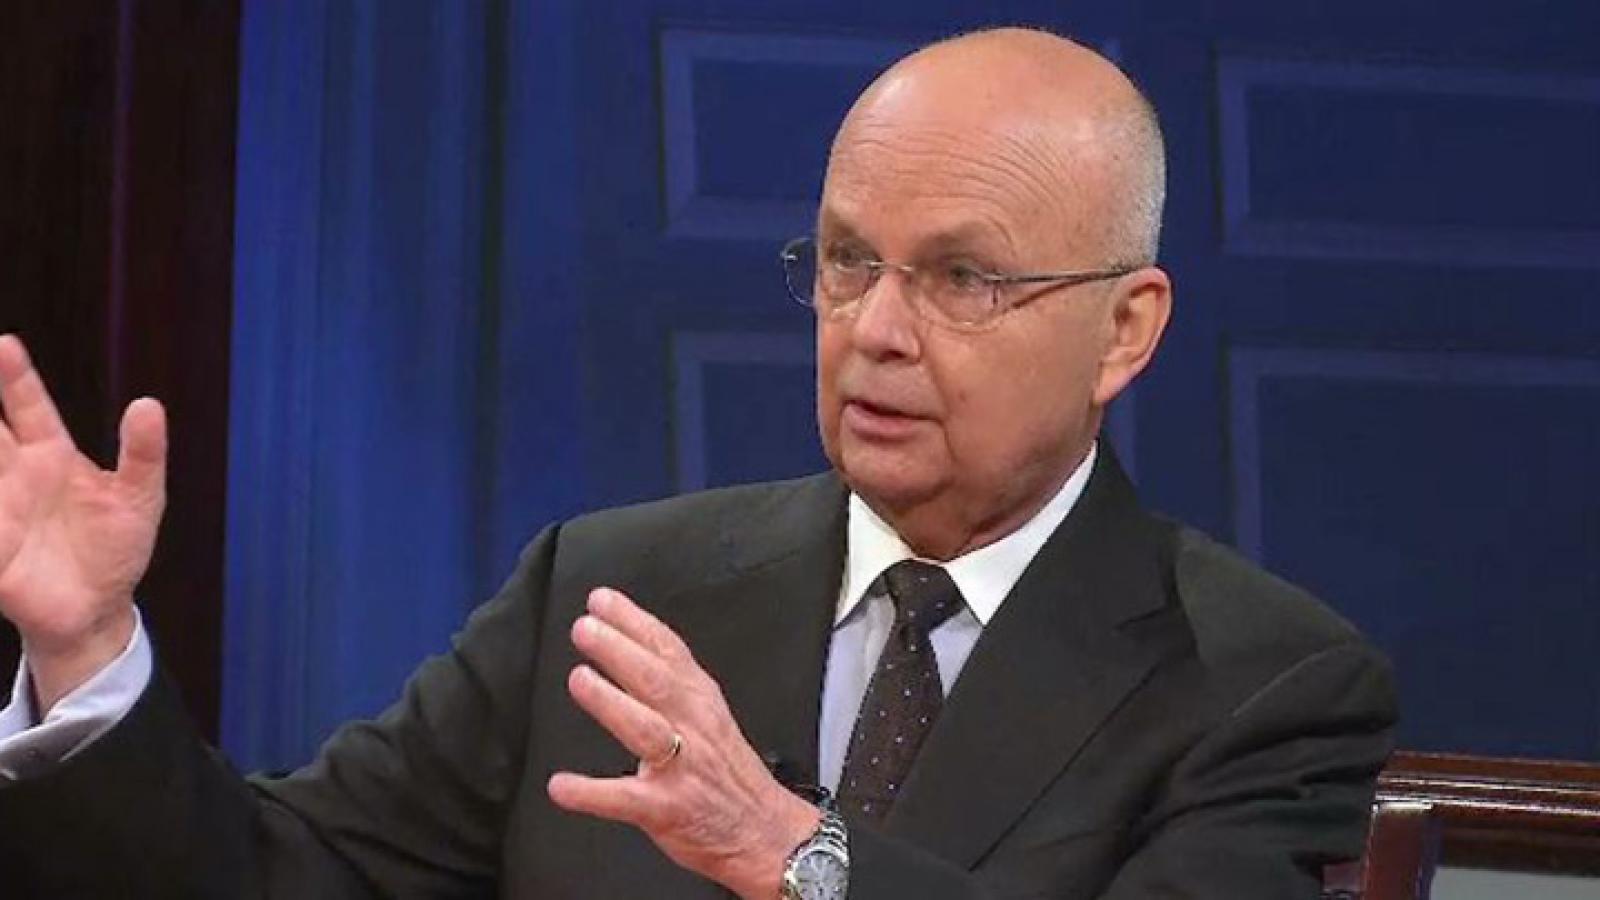 Michael Hayden's book is "Playing to the Edge: American Intelligence in the Age of Terror"